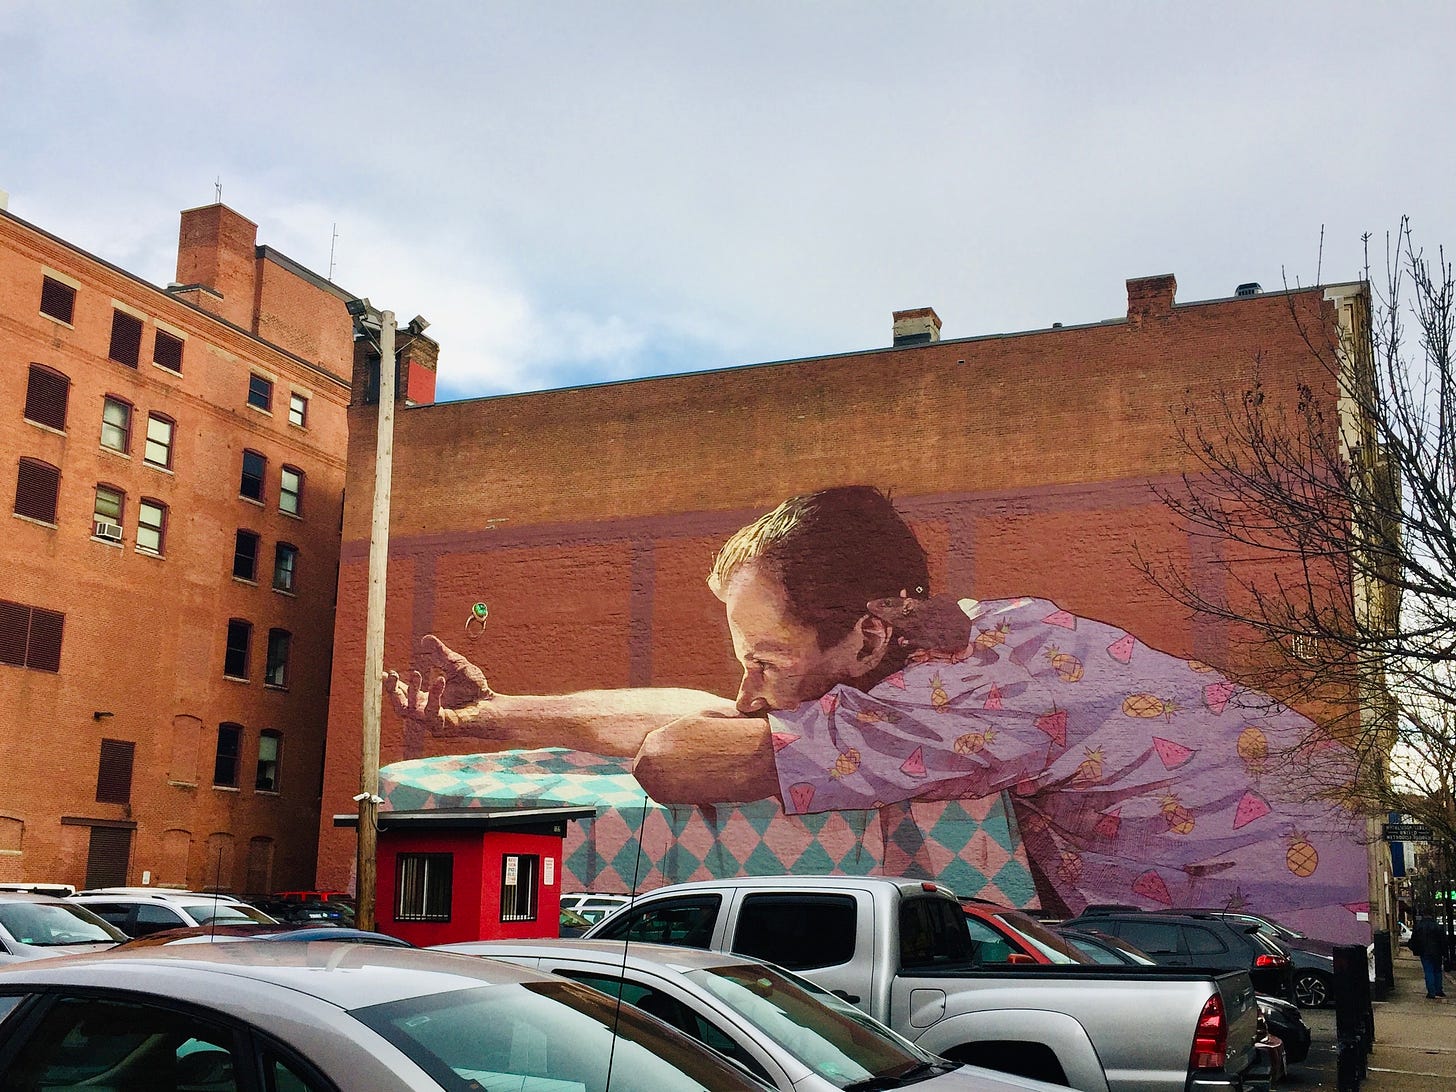 A mural of a man tossing a ring into the air, looking forlorn